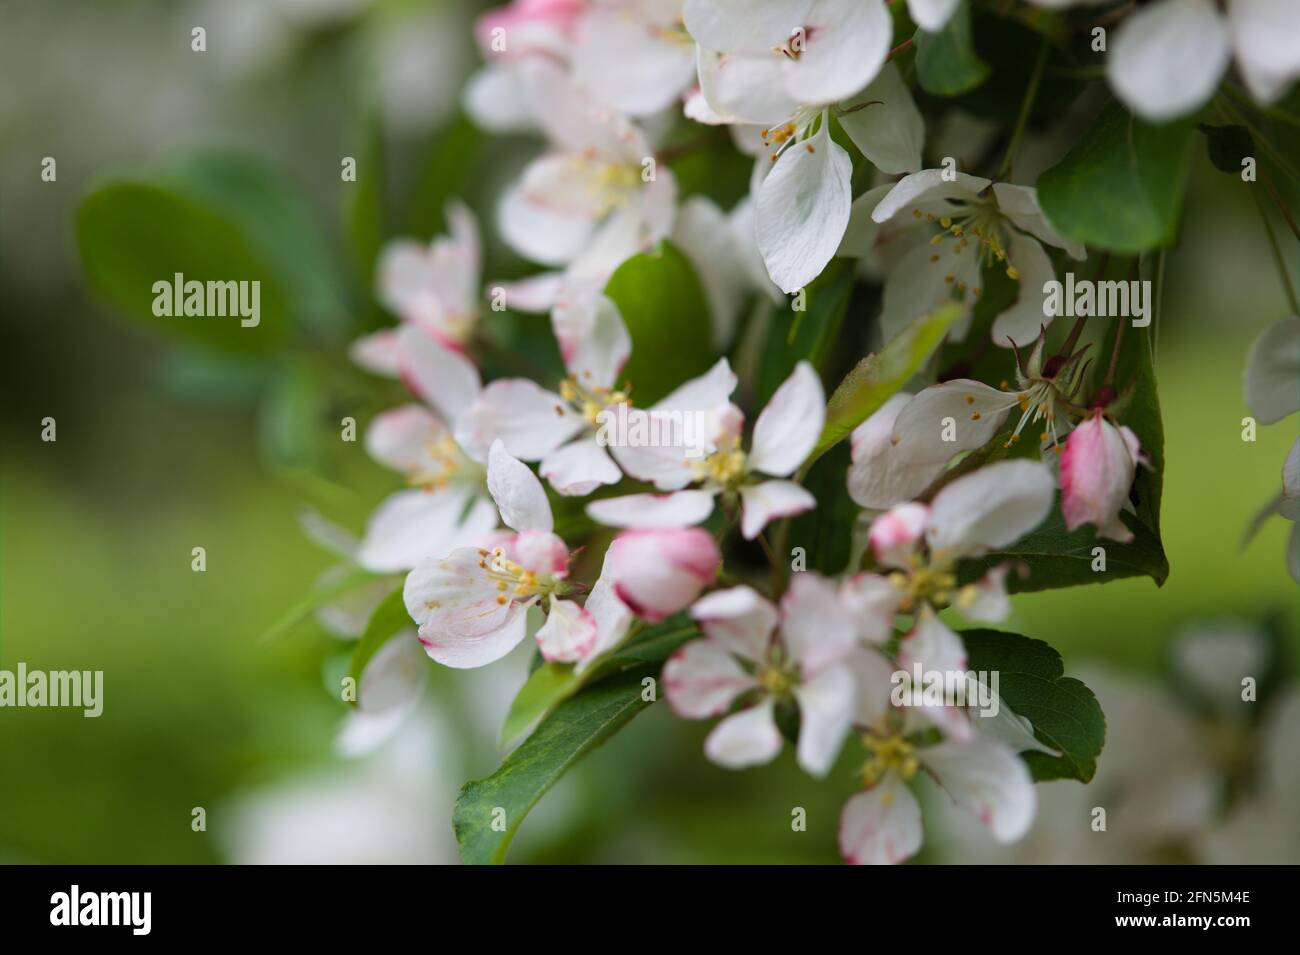 View of Malus 'Winter Gold' apple blossoms, Spring 2021 Stock Photo